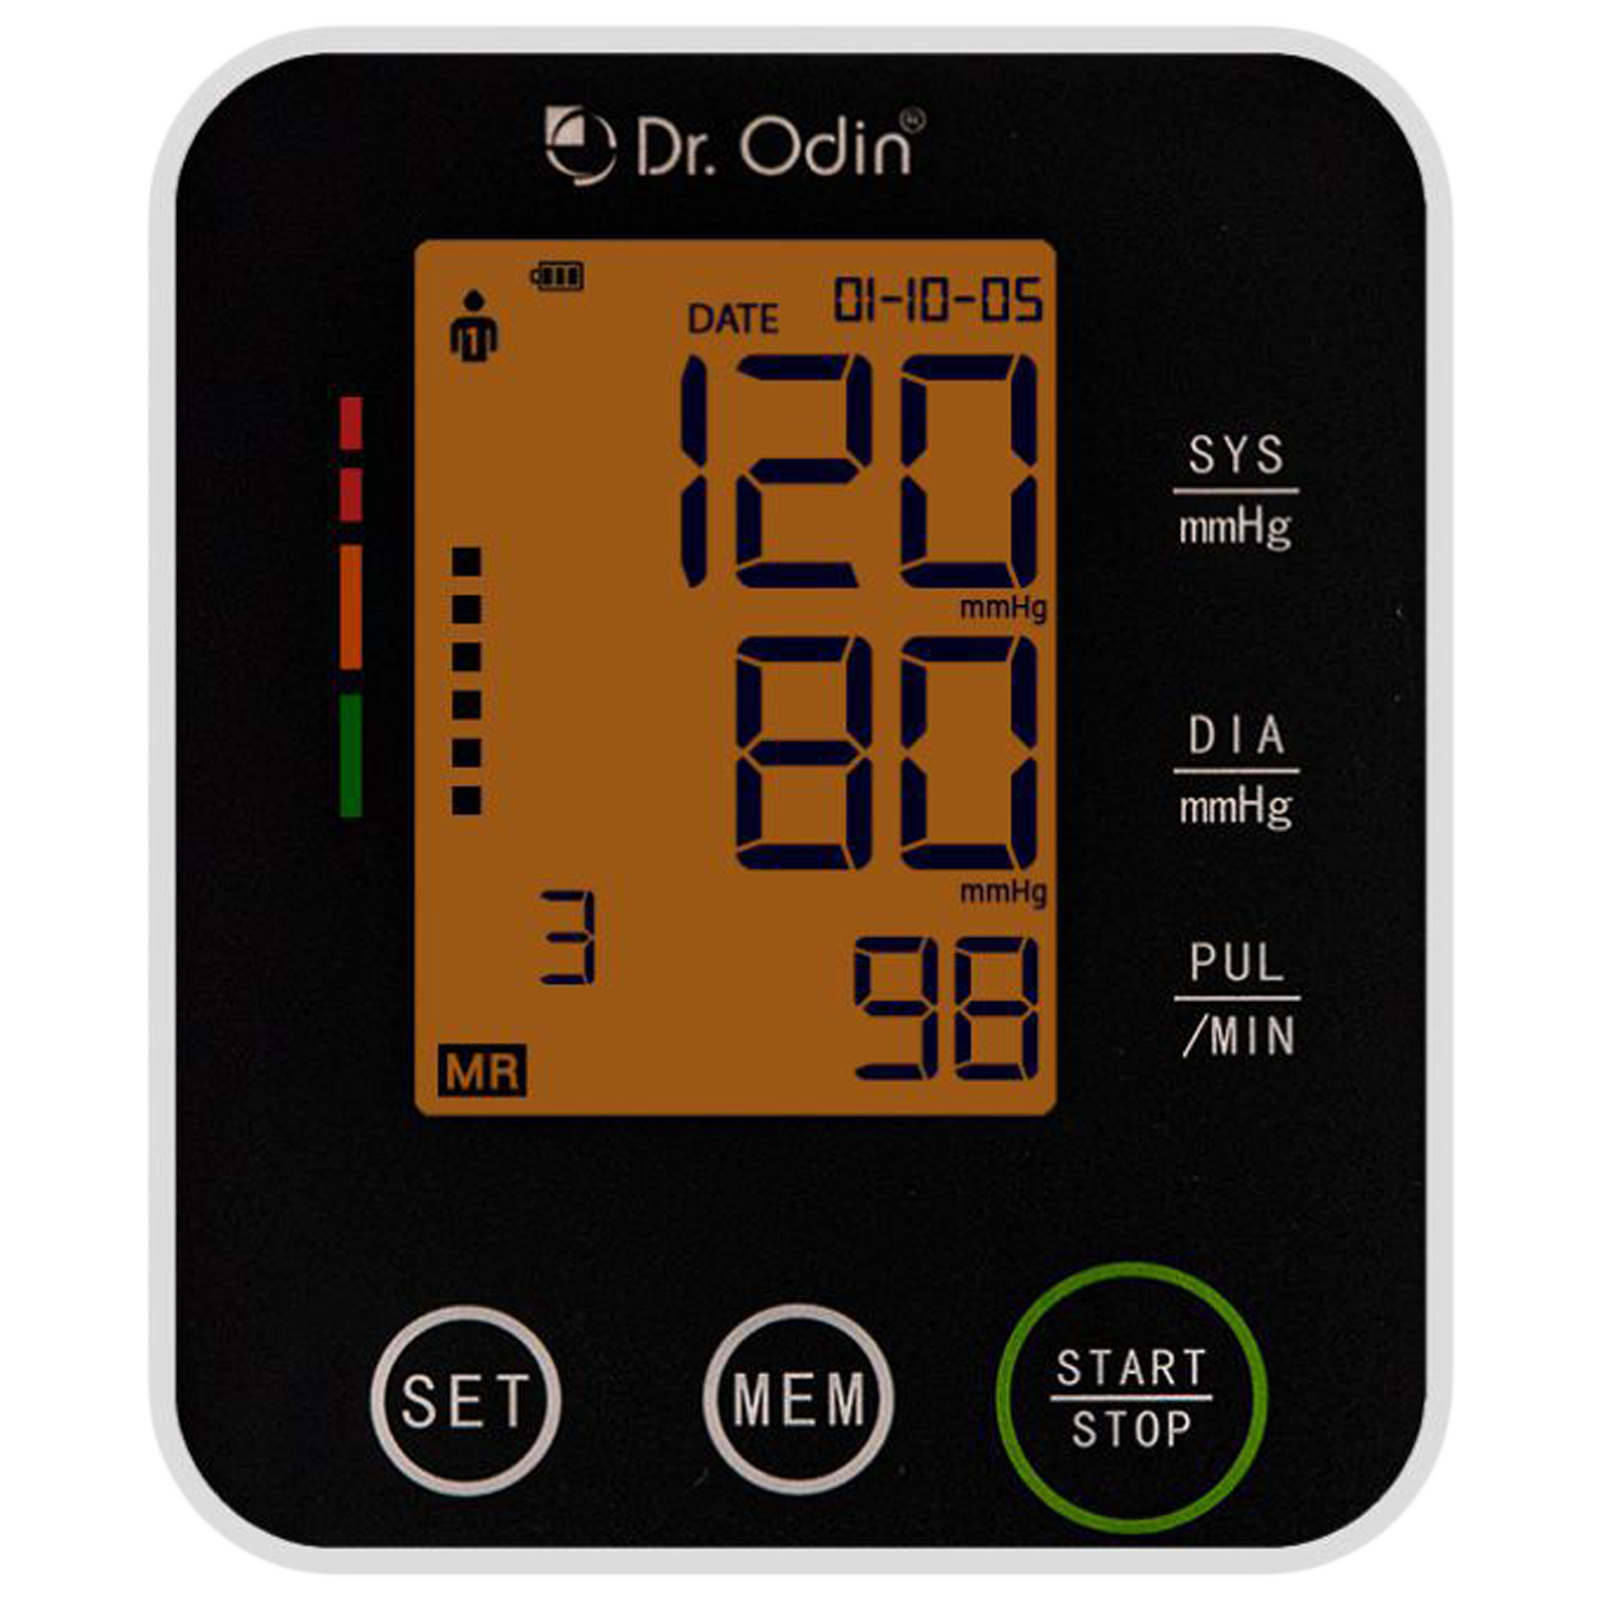 Dr. Odin - Dr. Odin LCD Blood Pressure Monitor (Auto Power Off, BSX516, Black)